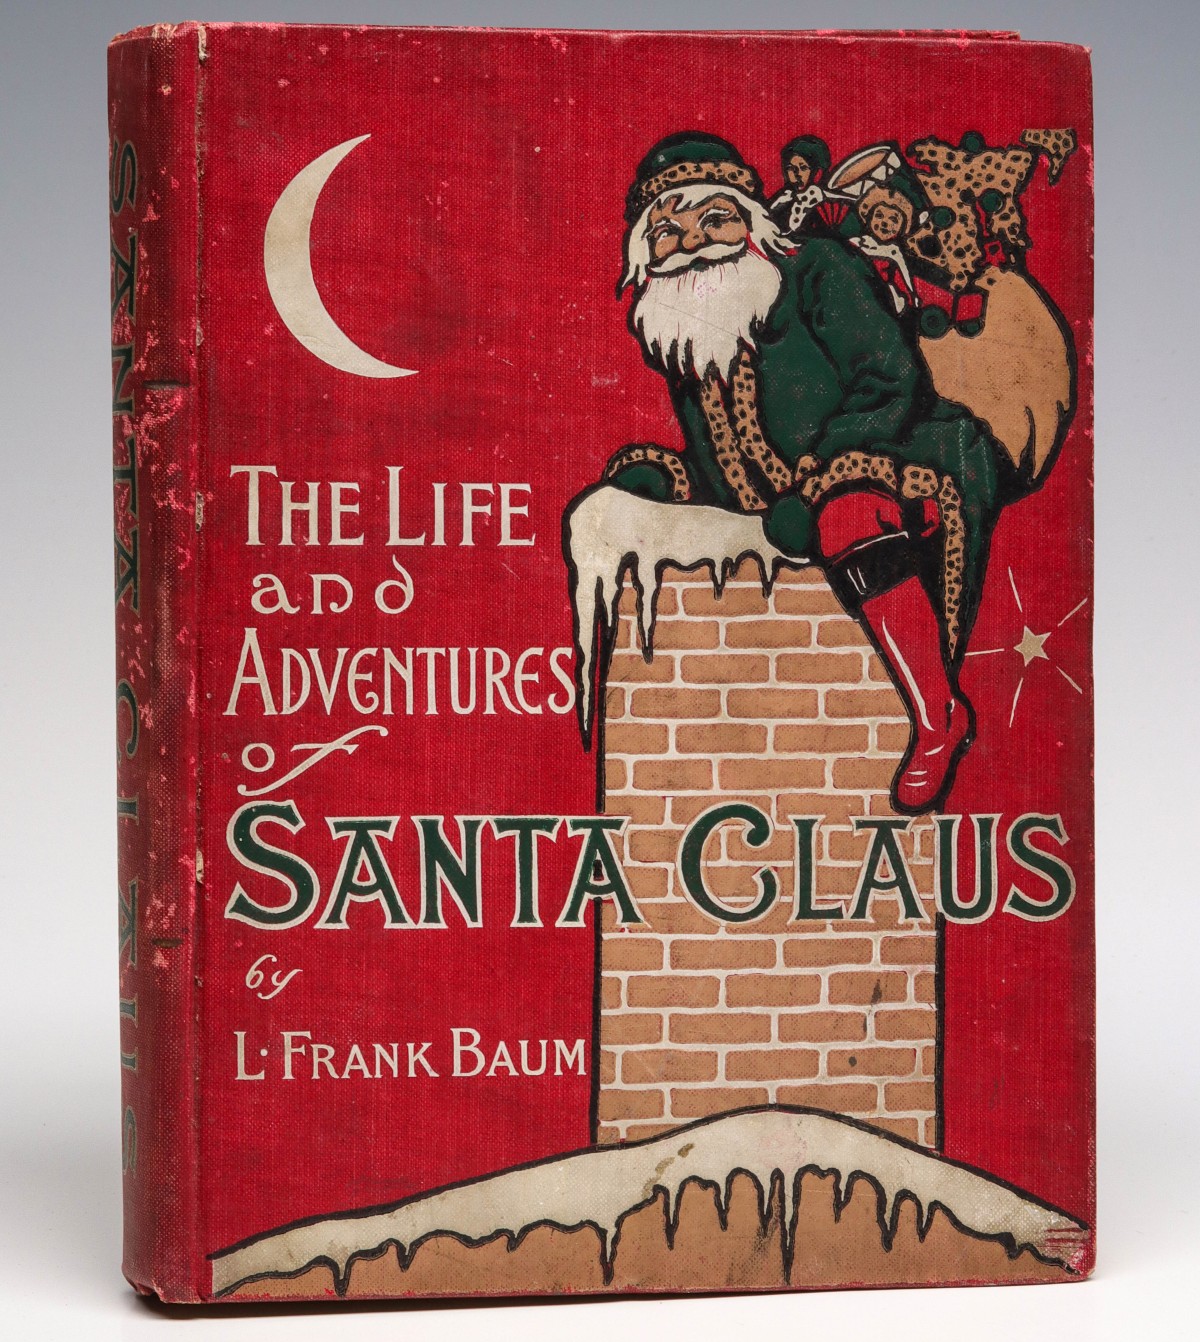 L. FRANK BAUM, THE LIFE AND ADVENTURES OF SANTA CLAUS